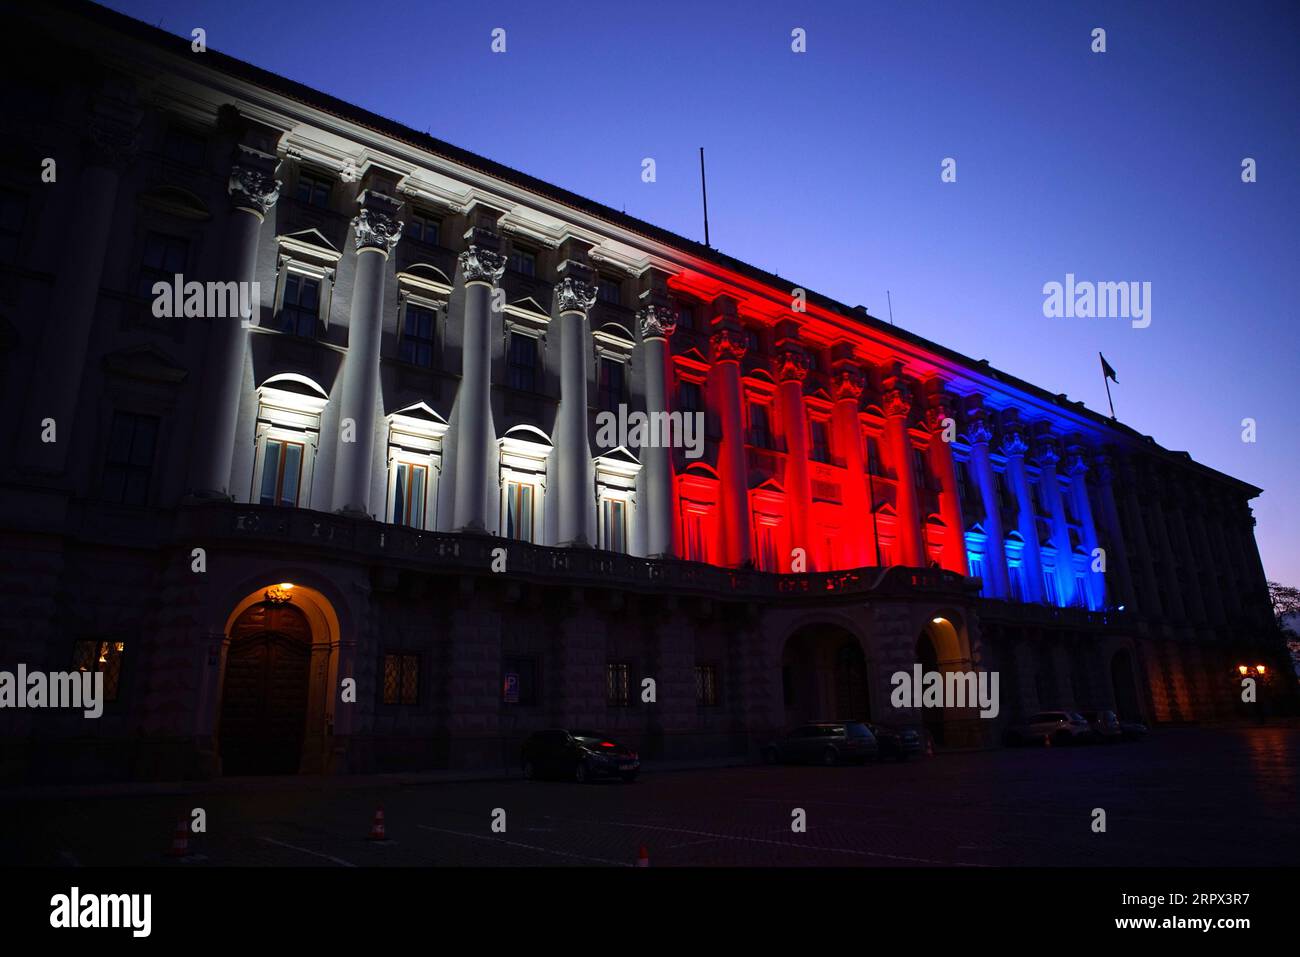 200506 -- PRAGUE, May 6, 2020 Xinhua -- The colors of the Czech tricolor national flag are projected on the building of the Cernin palace, the seat of the Foreign Ministry, to show a sign of solidarity and to pay tribute to the generosity and good deeds reacting to the COVID-19 pandemic in Prague, the Czech Republic, May 5, 2020. Photo by Dana Kesnerova/Xinhua CZECH REPUBLIC-PRAGUE-COVID-19-BUILDING-ILLUMINATION PUBLICATIONxNOTxINxCHN Stock Photo